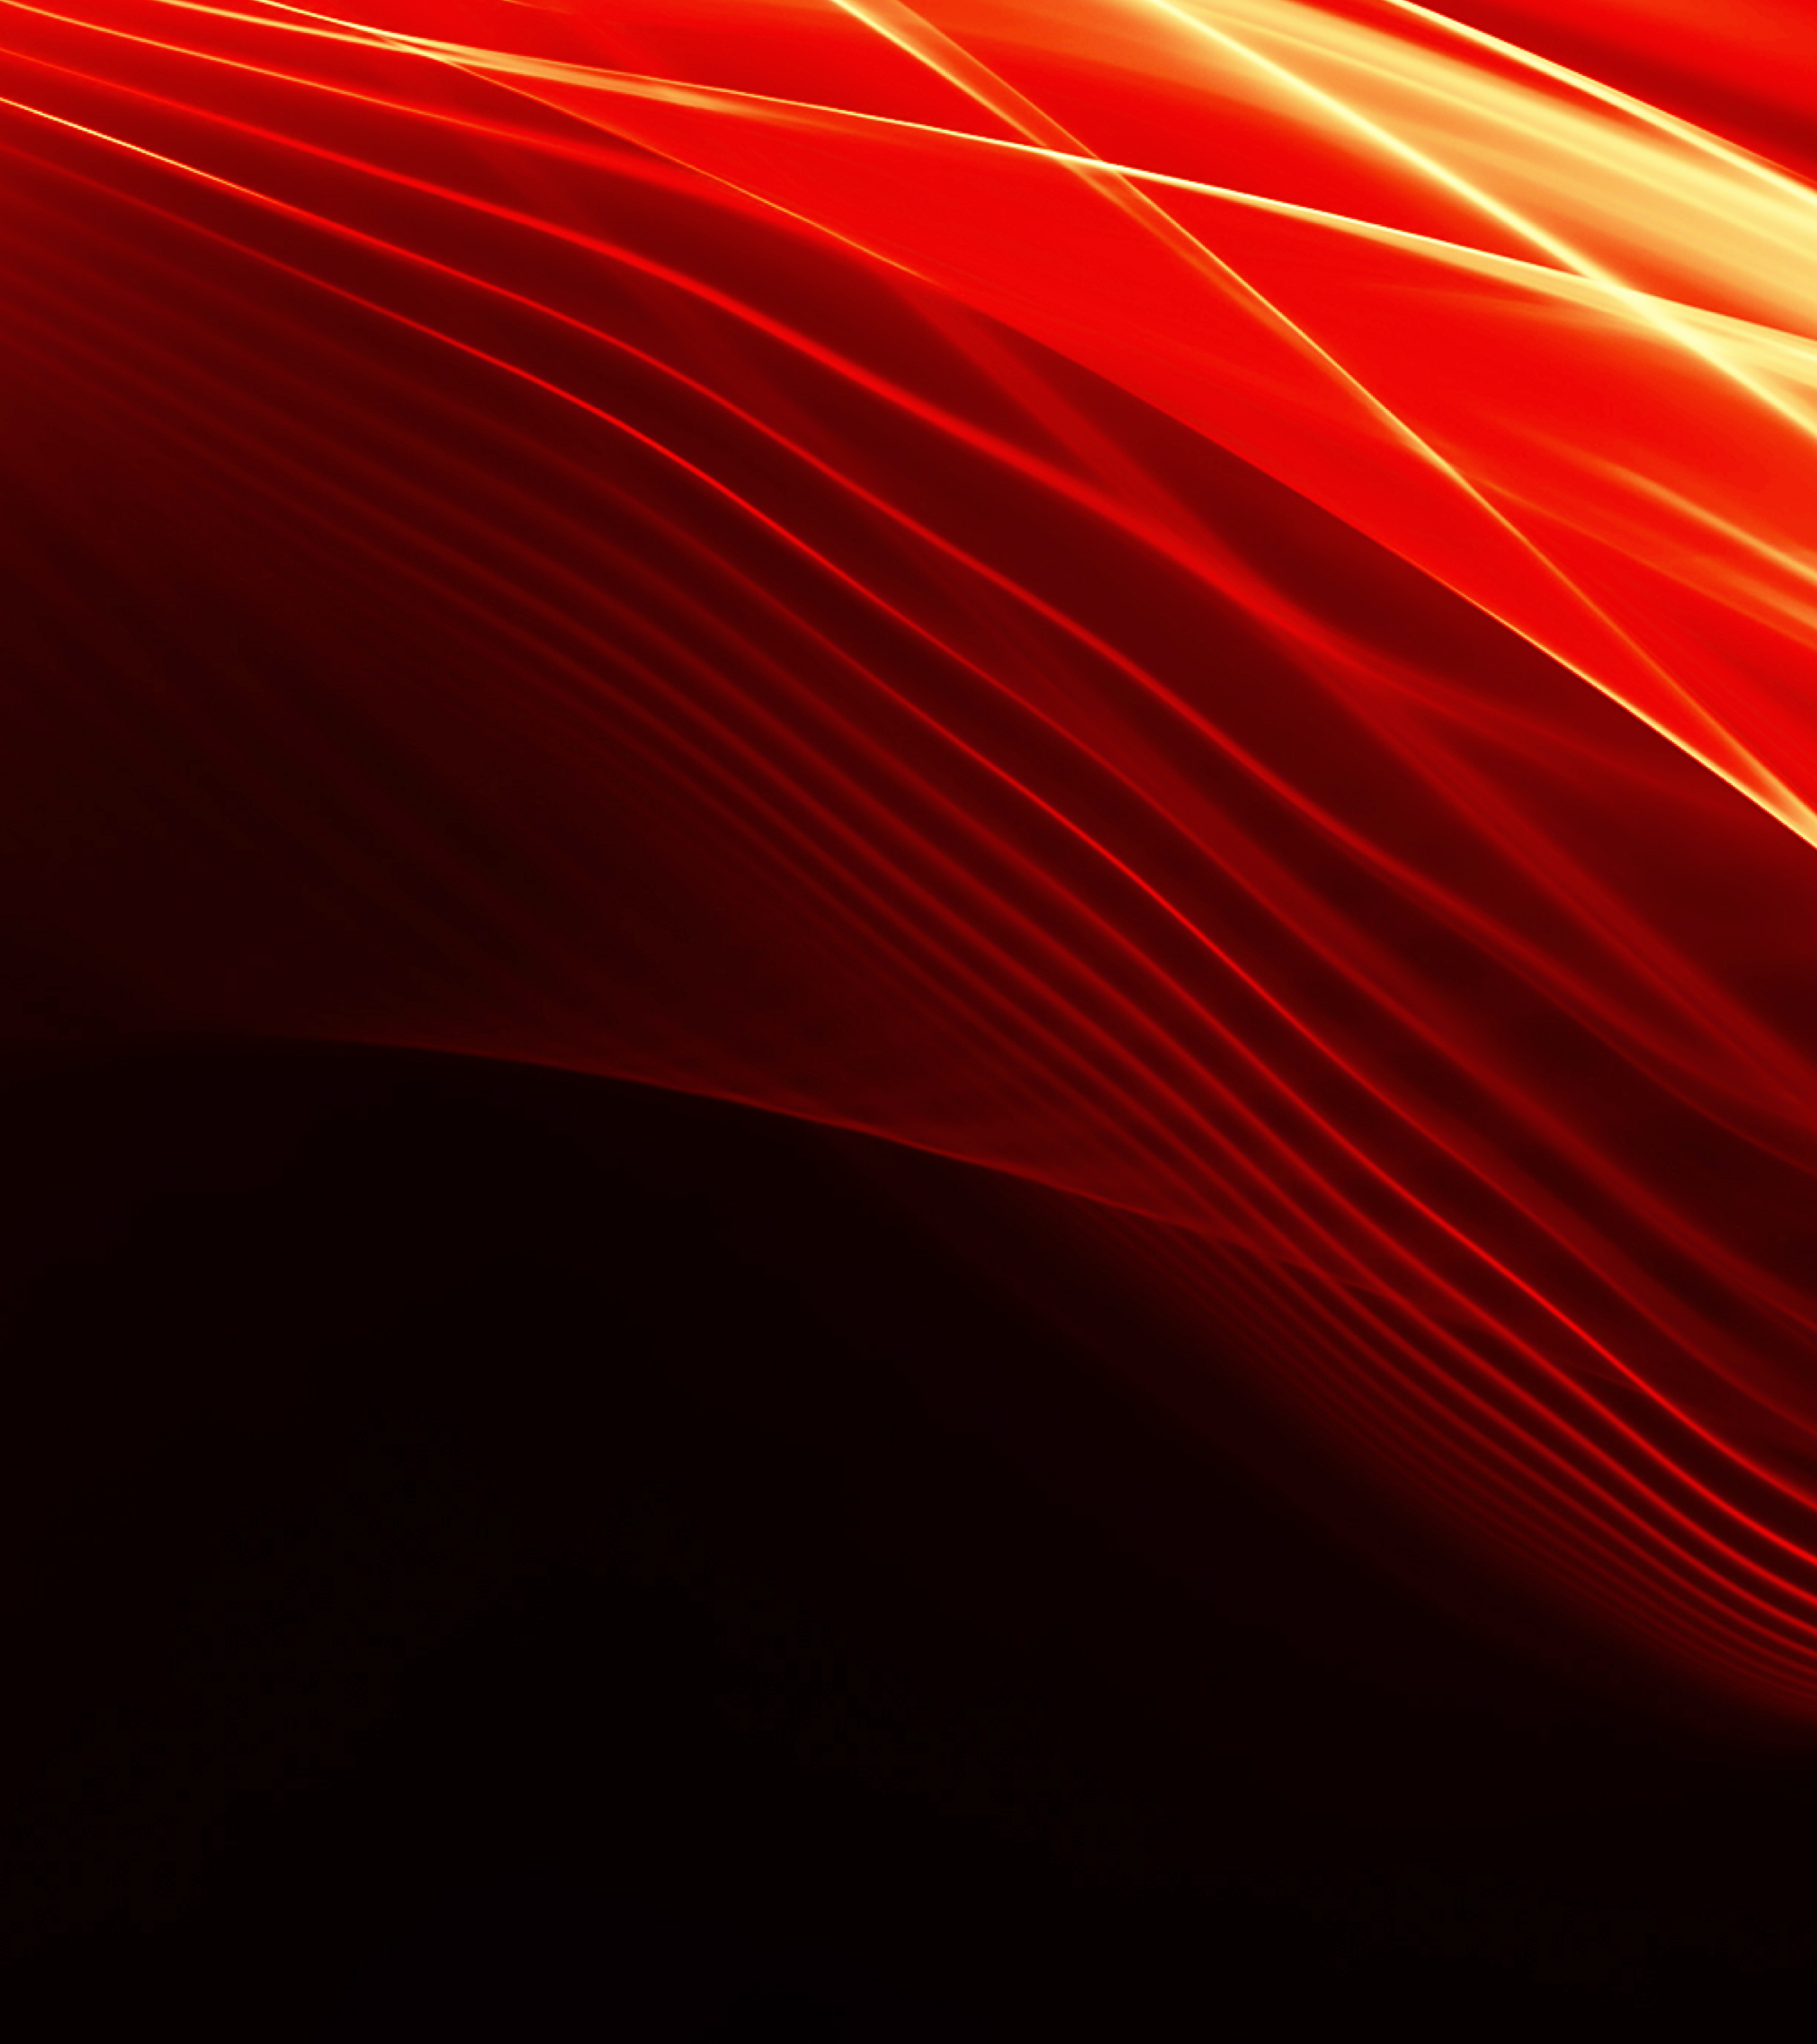 Background image of red lights on a black background